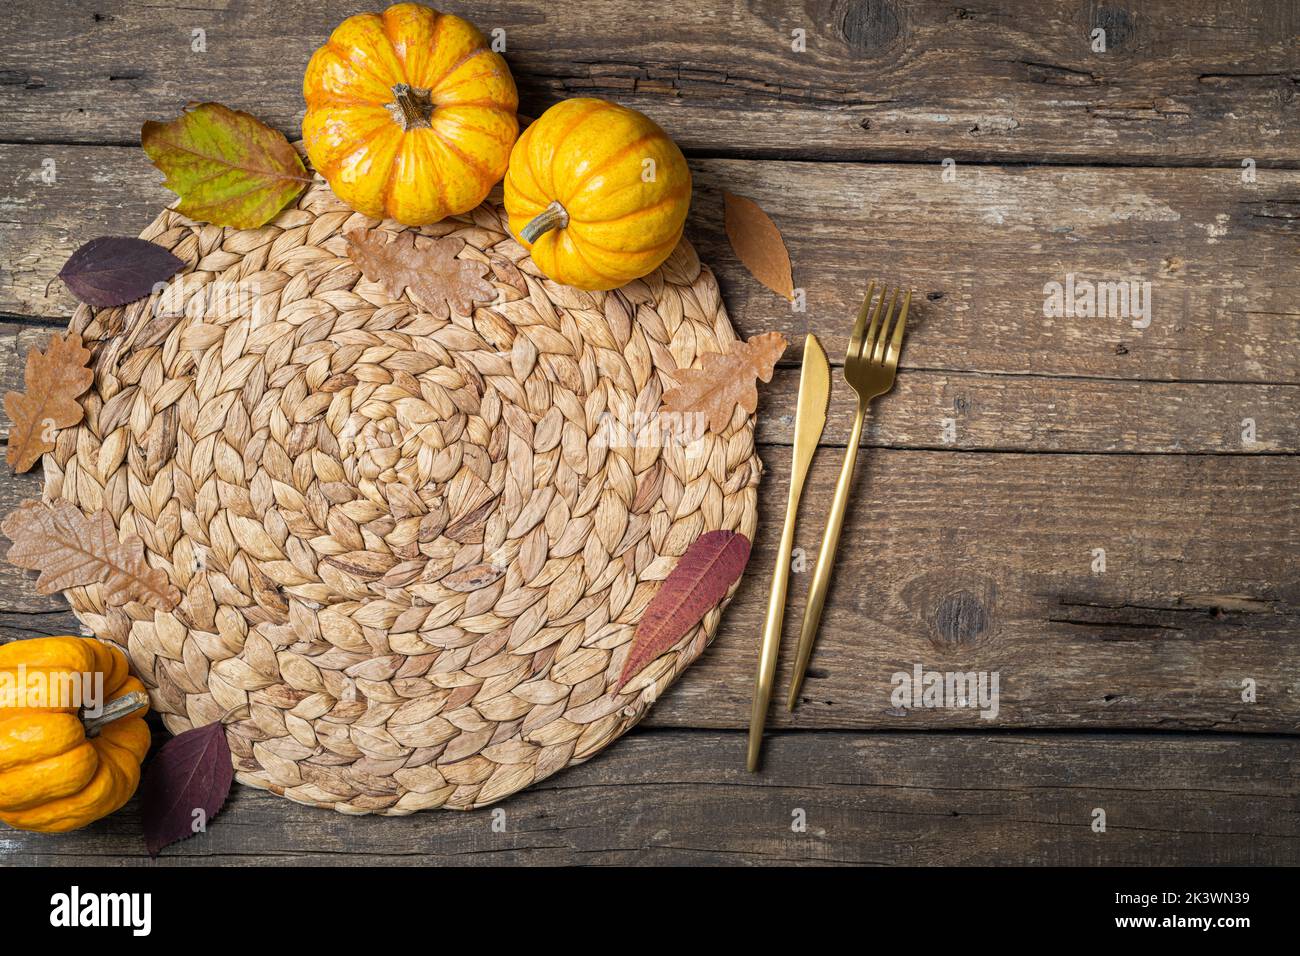 Restaurant menu. Top view of wicker straw place mat, pumpkins, autumn leaves and cutlery on rustic wooden table. Table setting on autumn background. C Stock Photo